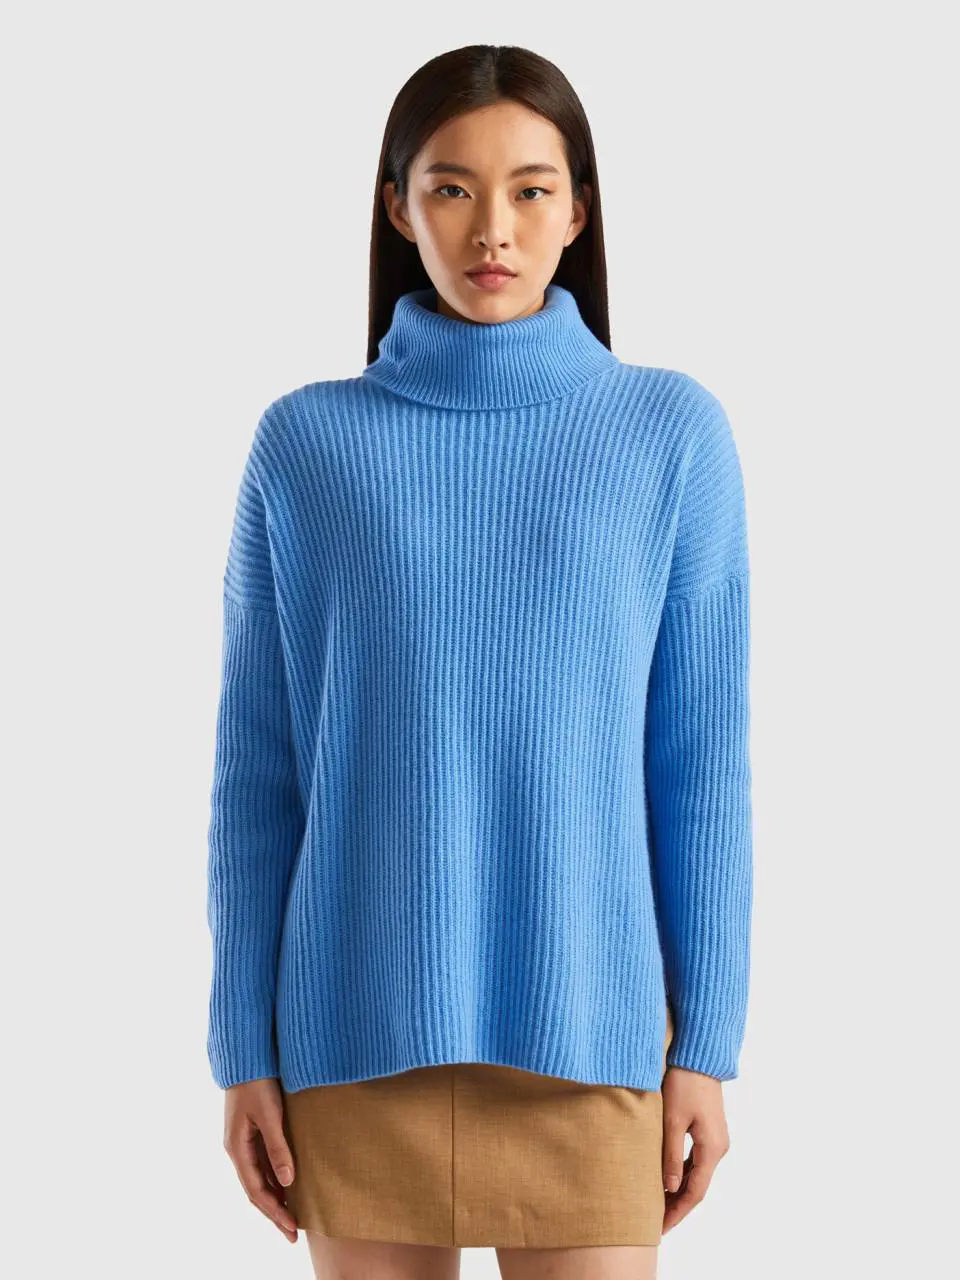 Benetton turtleneck with wide collar. 1